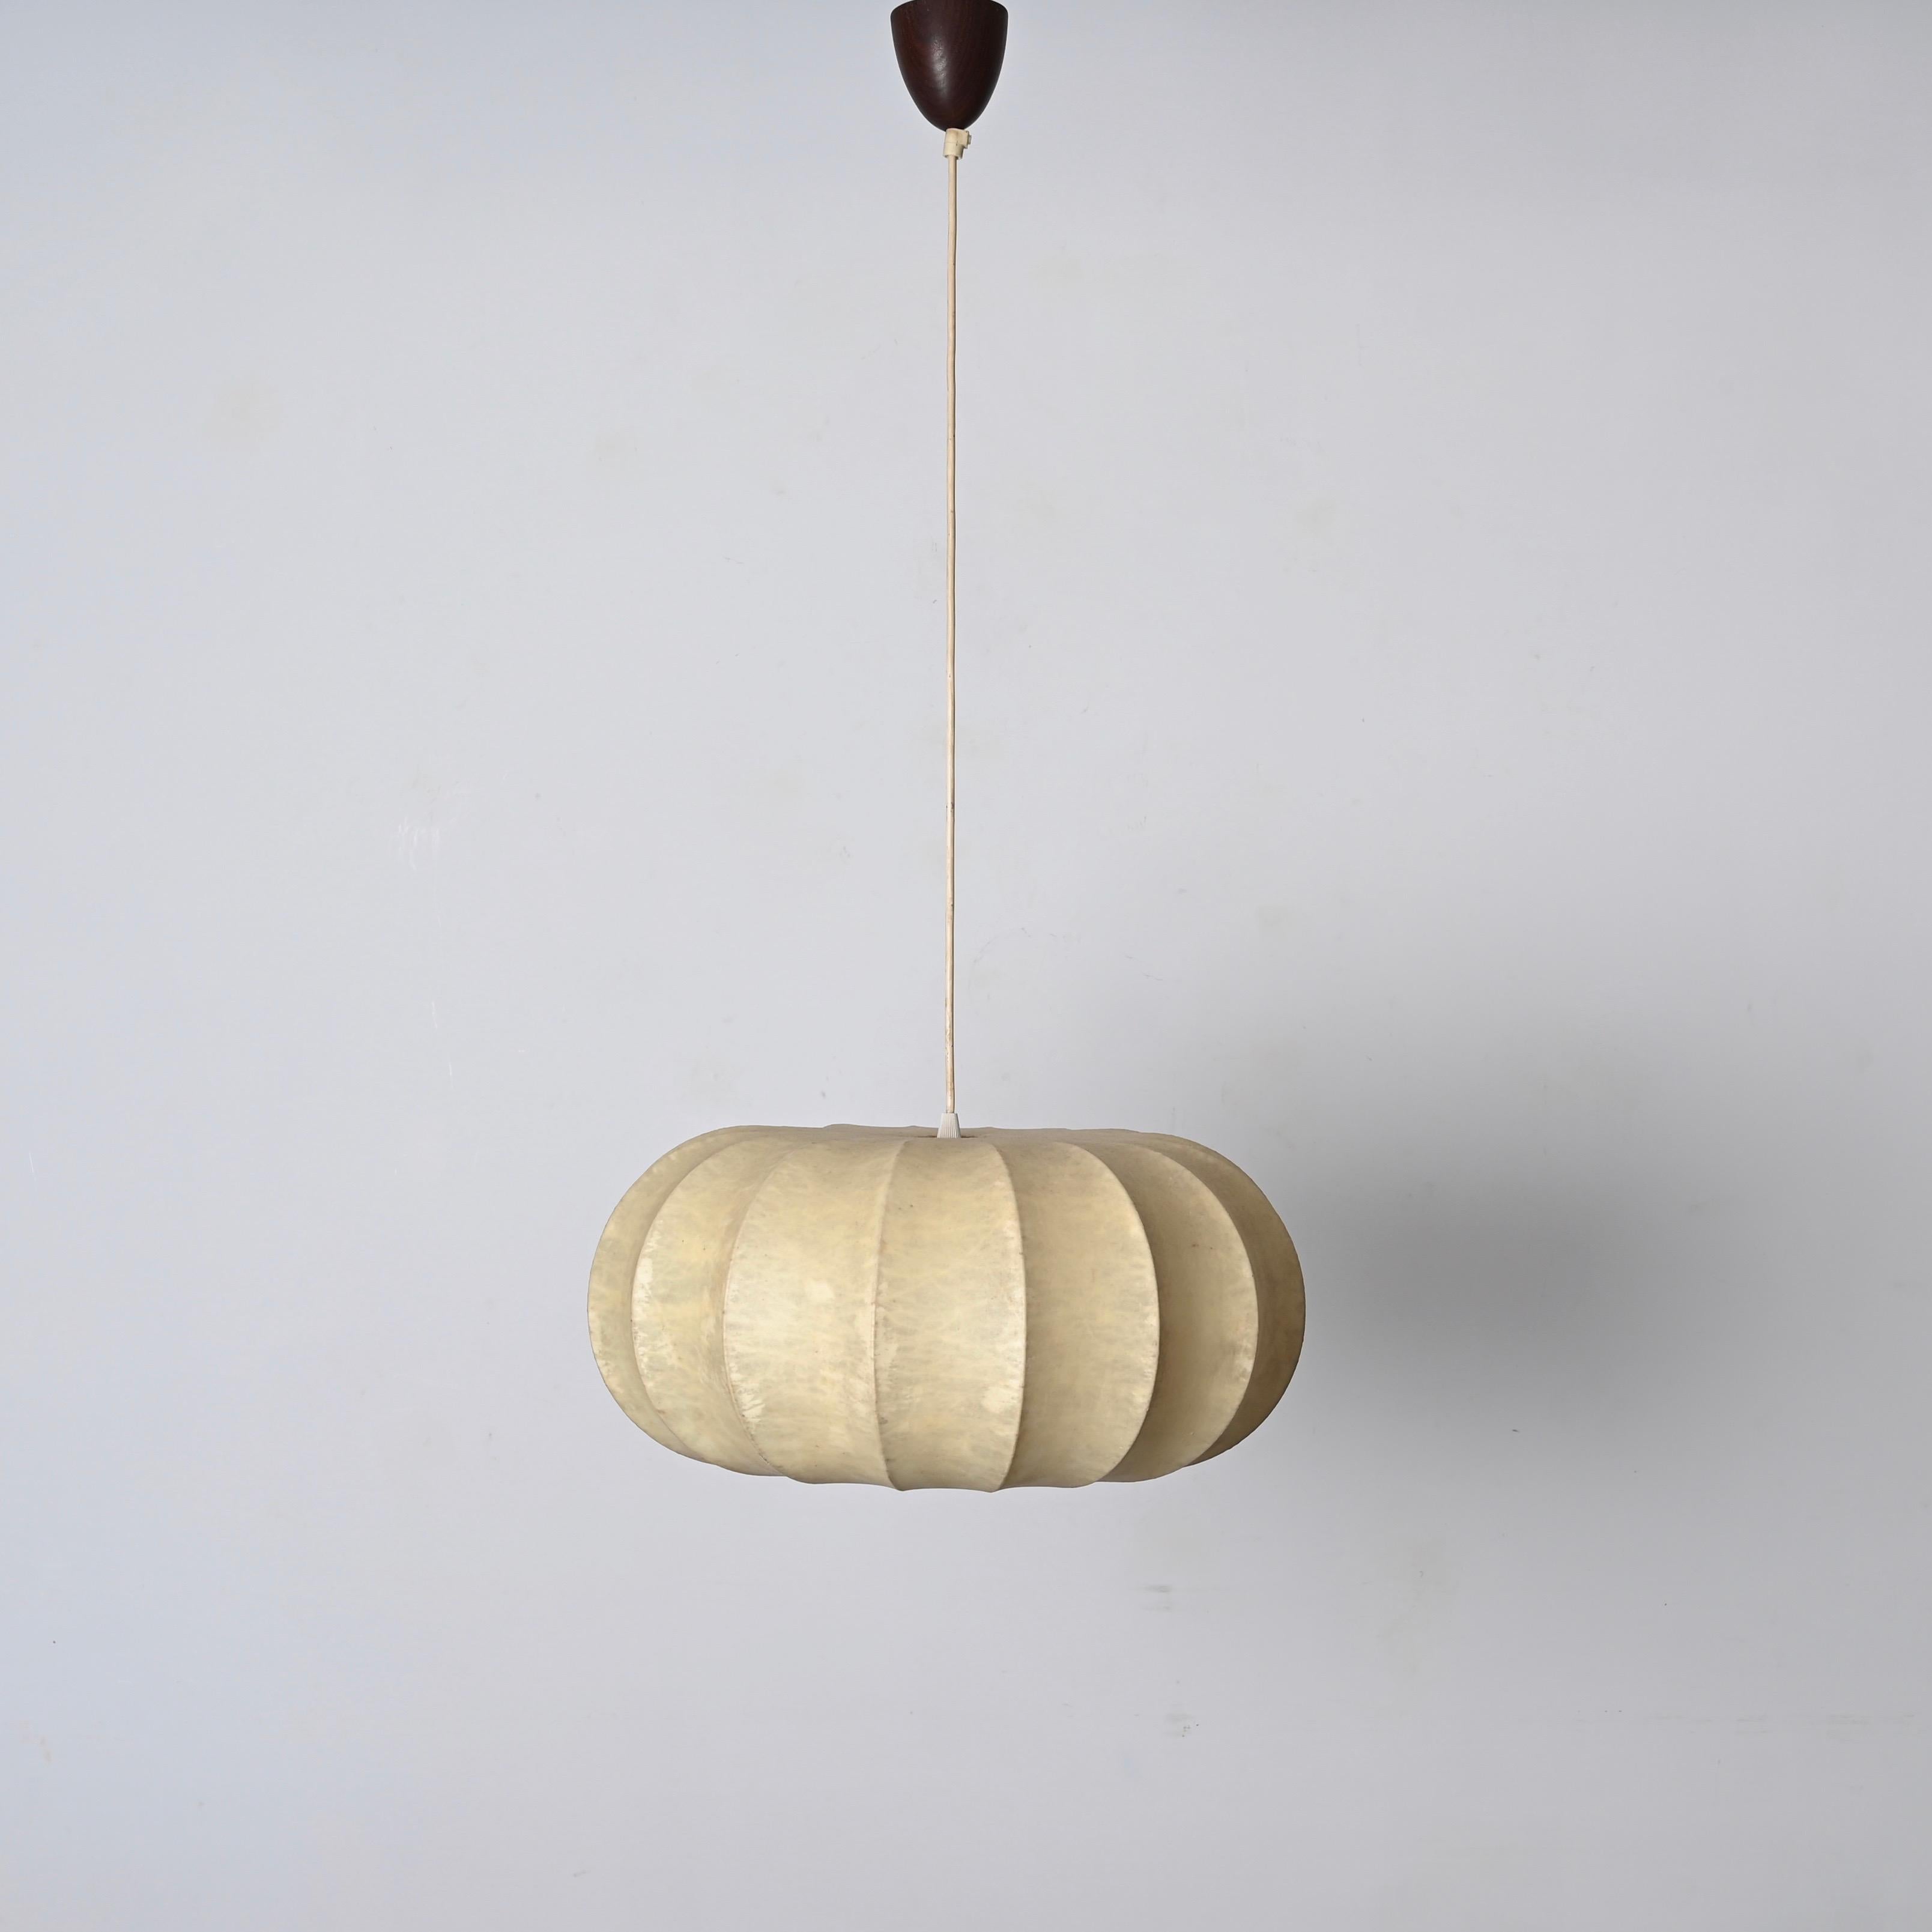 Stunning fully original mid-century cocoon pendant designed by Achille Castiglioni in Italy in the 1960s. 

This marvellous large cocoon features an incredibly elegant snd rare shape with a round-shaped shade with flat top and bottom. The shade is